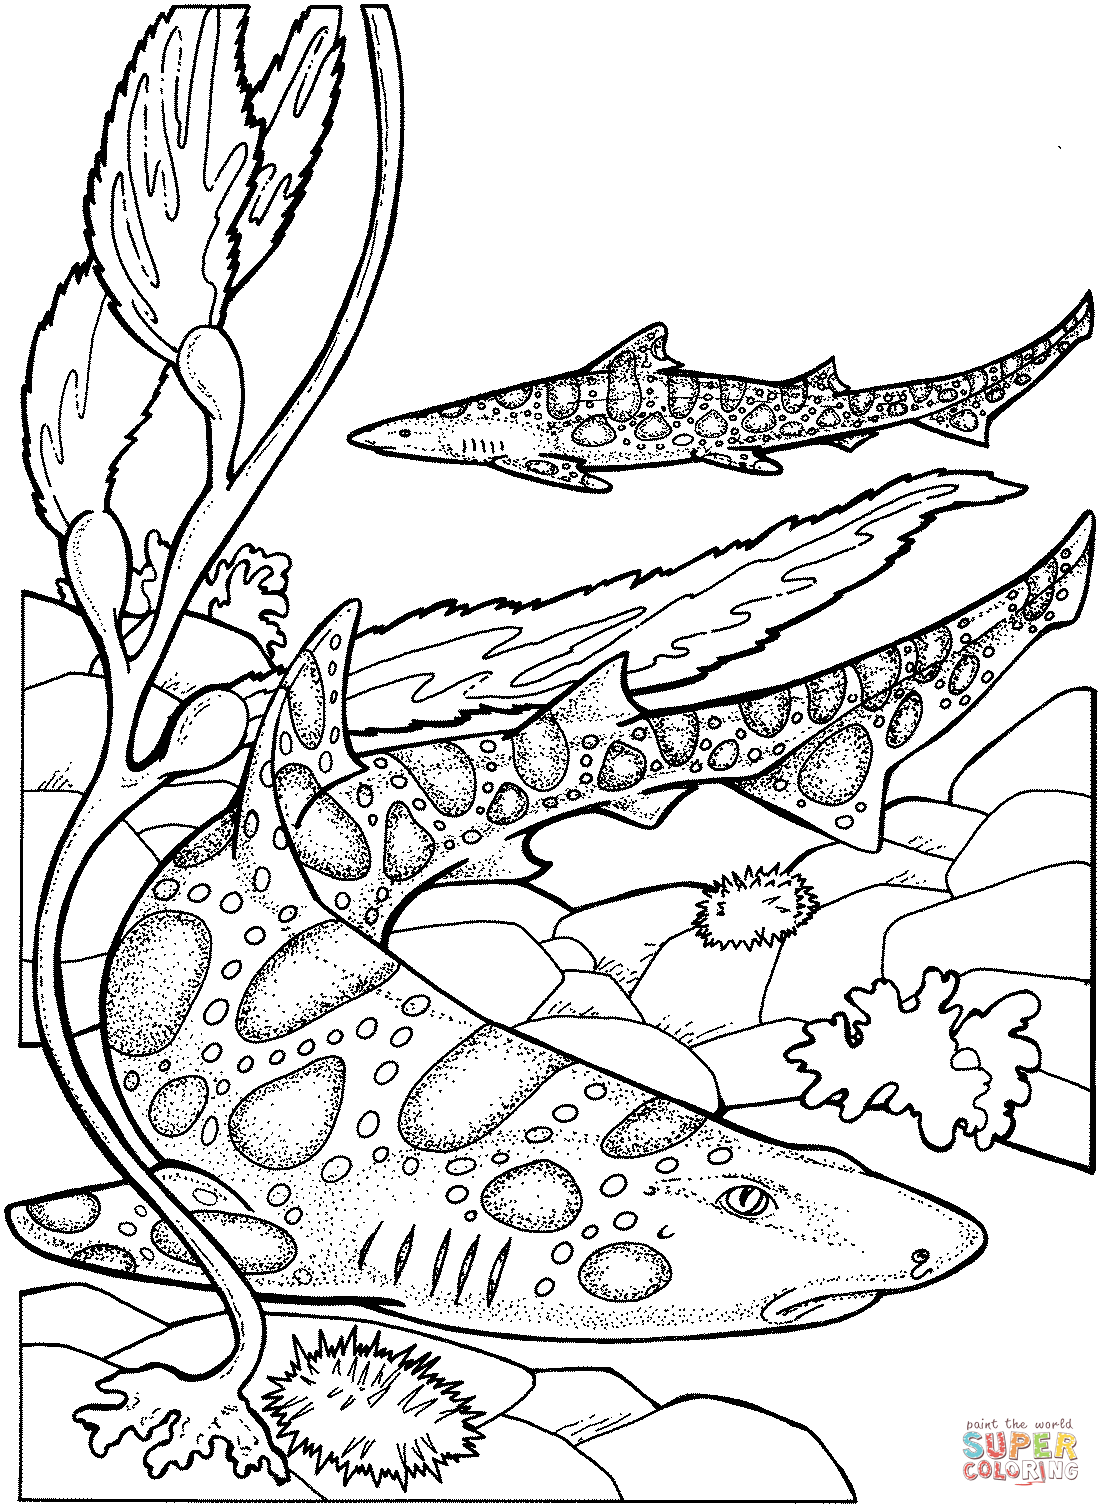 Bull Shark Full Coloring Pages - Coloring Pages For All Ages